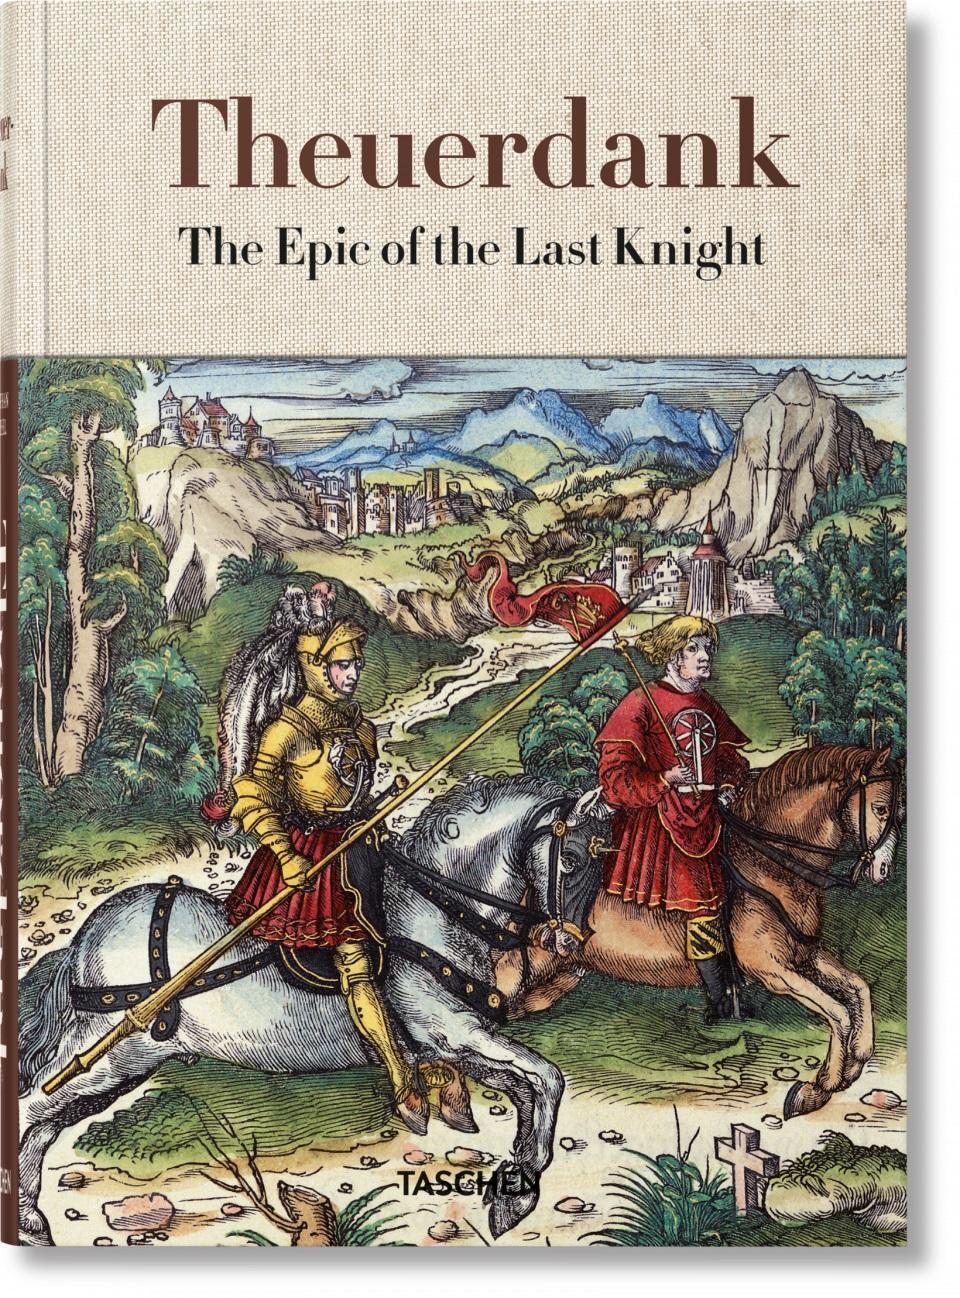 “Theuerdank: The Epic of the Last Knight,” the cover clothbound with two-color silk-screen illustration, 6.7 inches by 9.4 inches. (Taschen)